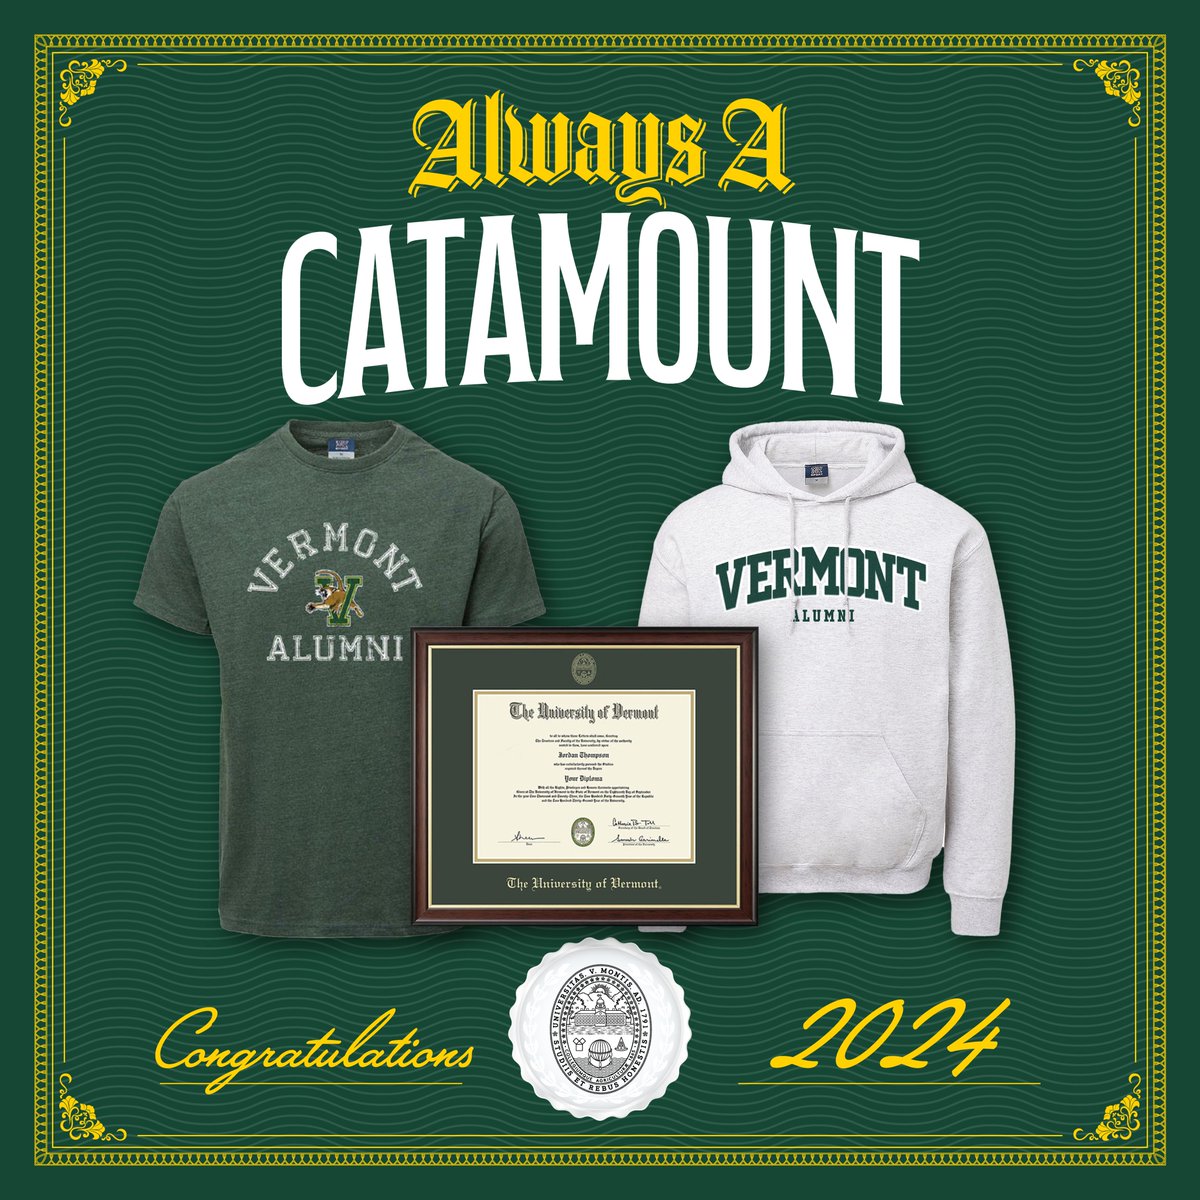 One of the best parts about graduation is getting to upgrade your UVM gear to say ALUMNI! Get yours now in the link below! 🔗 uvmbookstore.uvm.edu 🎓 #LetsRally